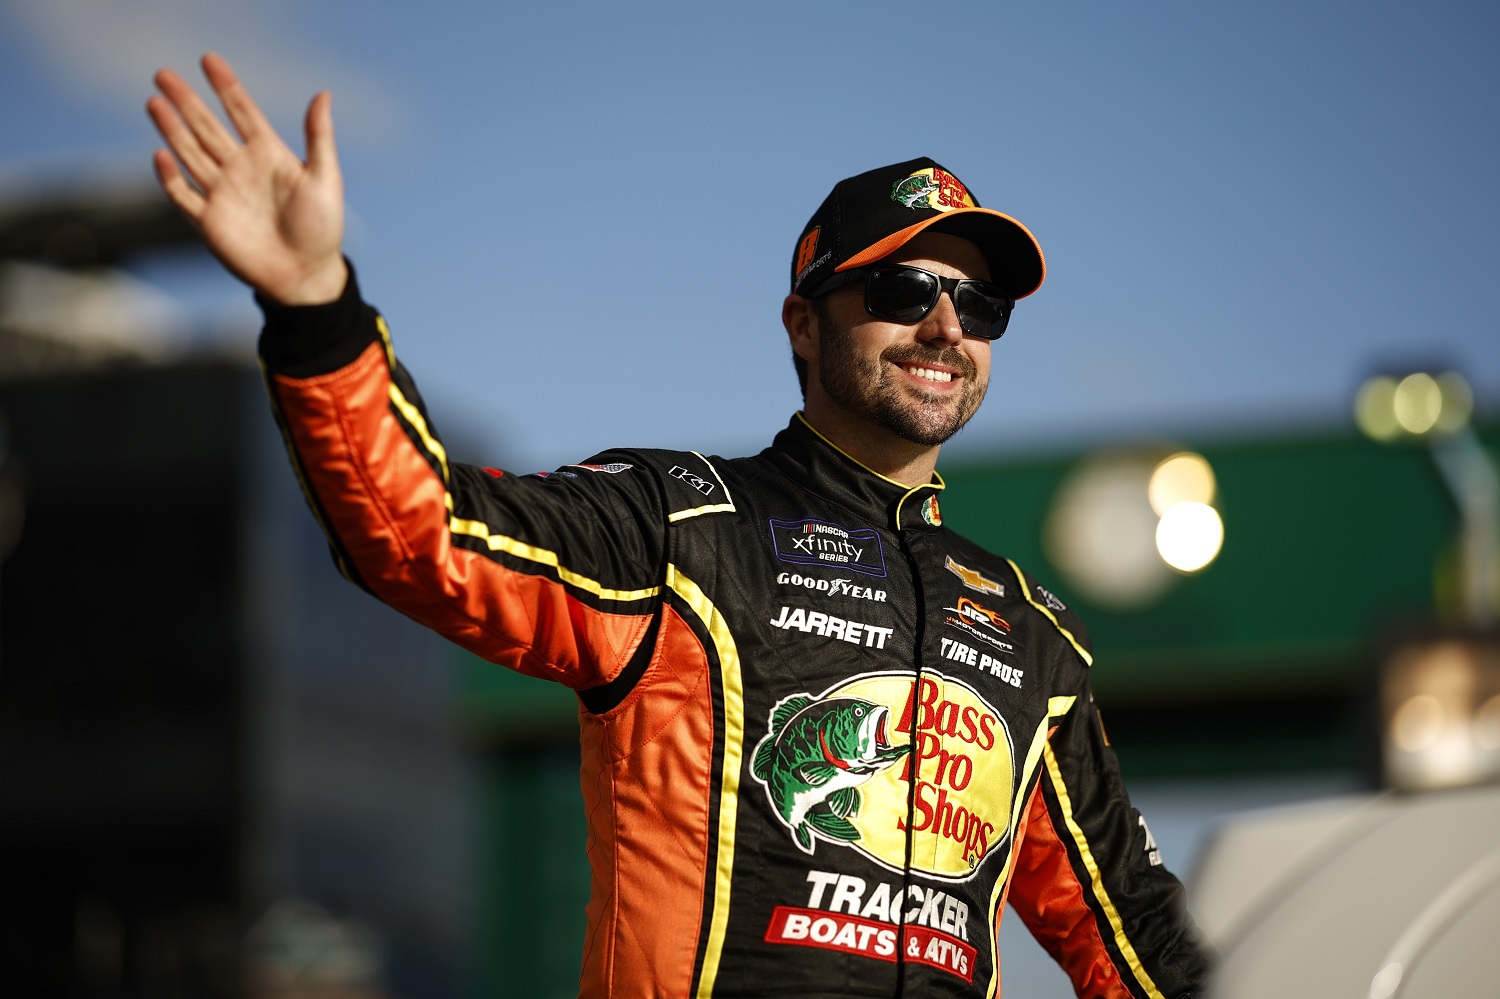 Josh Berry waves to fans during the parade lap before the NASCAR Xfinity Series race at Daytona International Speedway on Feb. 18, 2023. | Chris Graythen/Getty Images